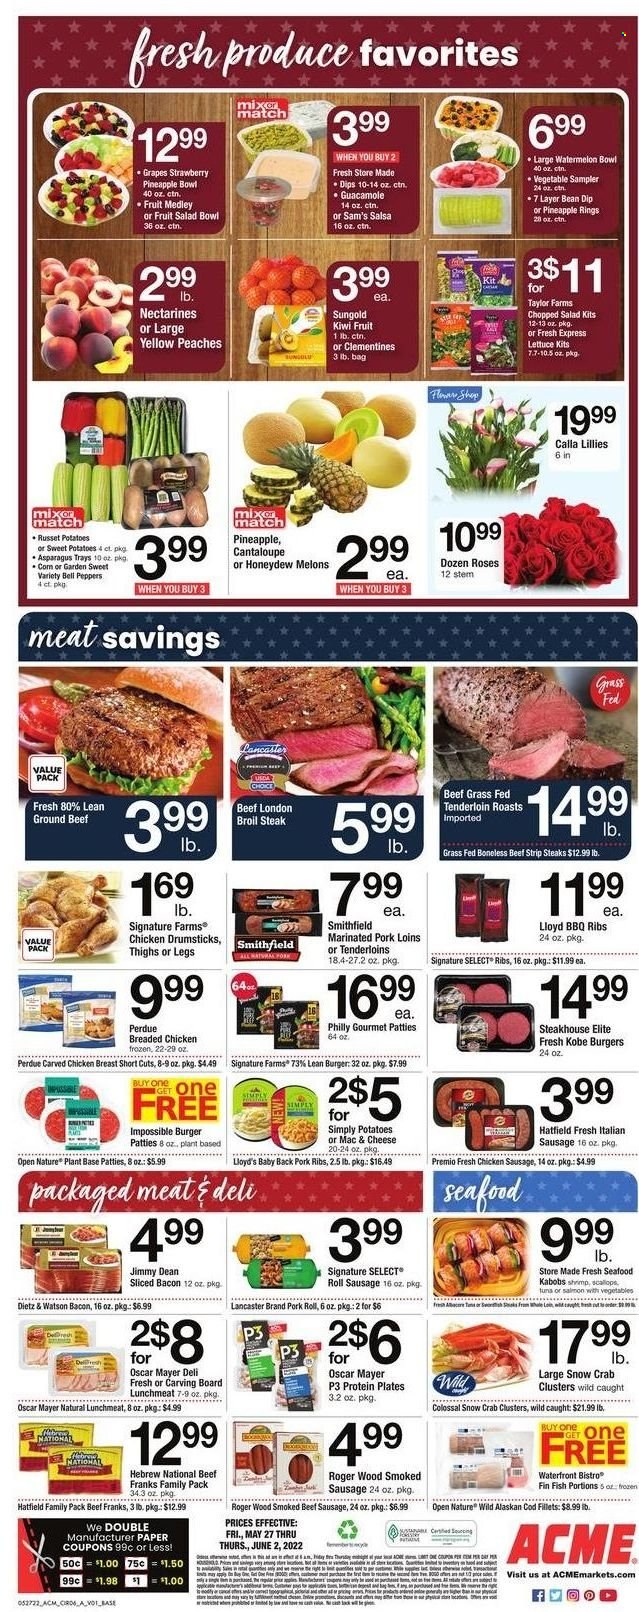 thumbnail - ACME Flyer - 05/27/2022 - 06/02/2022 - Sales products - asparagus, bell peppers, cantaloupe, russet potatoes, sweet potato, potatoes, peppers, chopped salad, grapes, kiwi, watermelon, honeydew, cod, scallops, seafood, crab, fish, shrimps, hamburger, fried chicken, Perdue®, Jimmy Dean, bacon, Oscar Mayer, Dietz & Watson, sausage, smoked sausage, chicken sausage, italian sausage, guacamole, lunch meat, dip, fruit salad, salsa, Ciro, chicken drumsticks, beef meat, ground beef, steak, striploin steak, burger patties, pork meat, pork ribs, pork back ribs, marinated pork, fork, salad bowl, paper, mixer, clementines, nectarines, melons, peaches. Page 8.